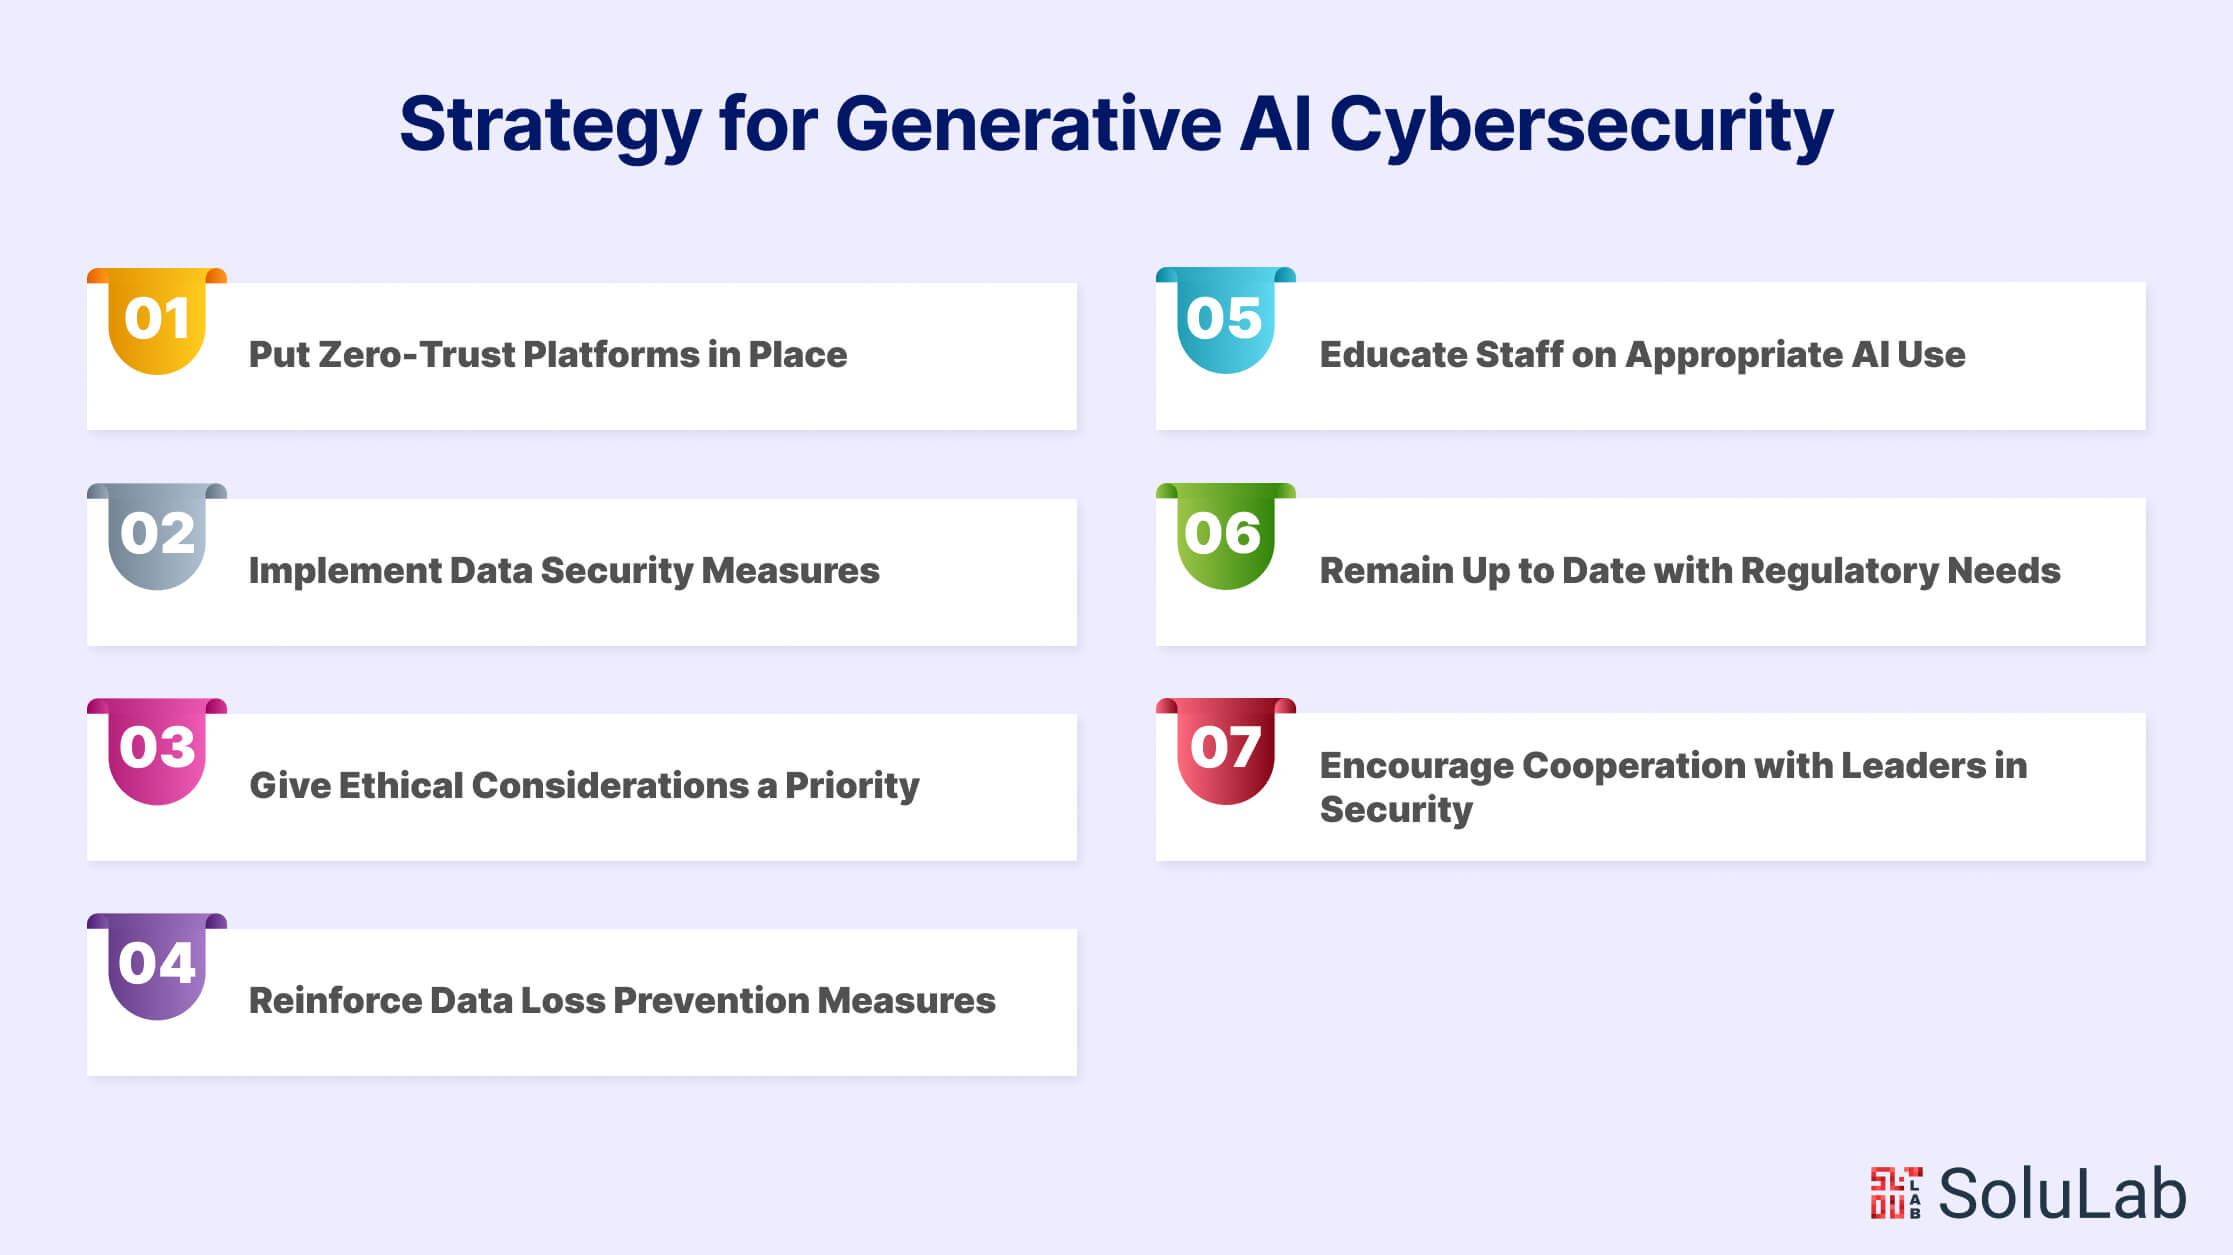 Strategy for Generative AI Cybersecurity